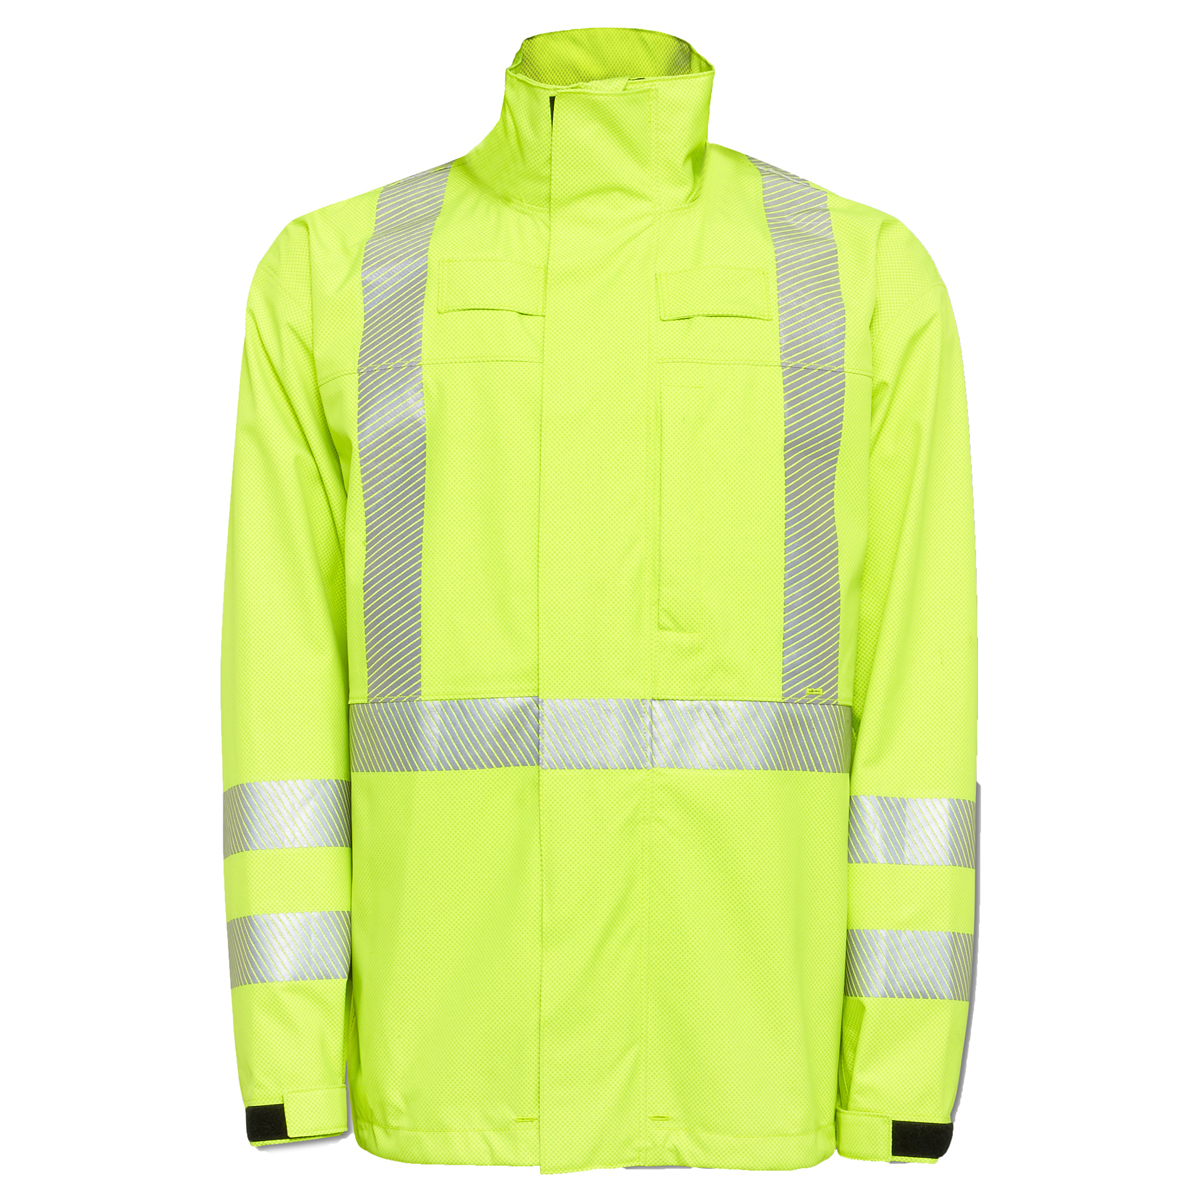 National Safety Apparel 2X Fluorescent Yellow GORETEX PYRAD Foul ...